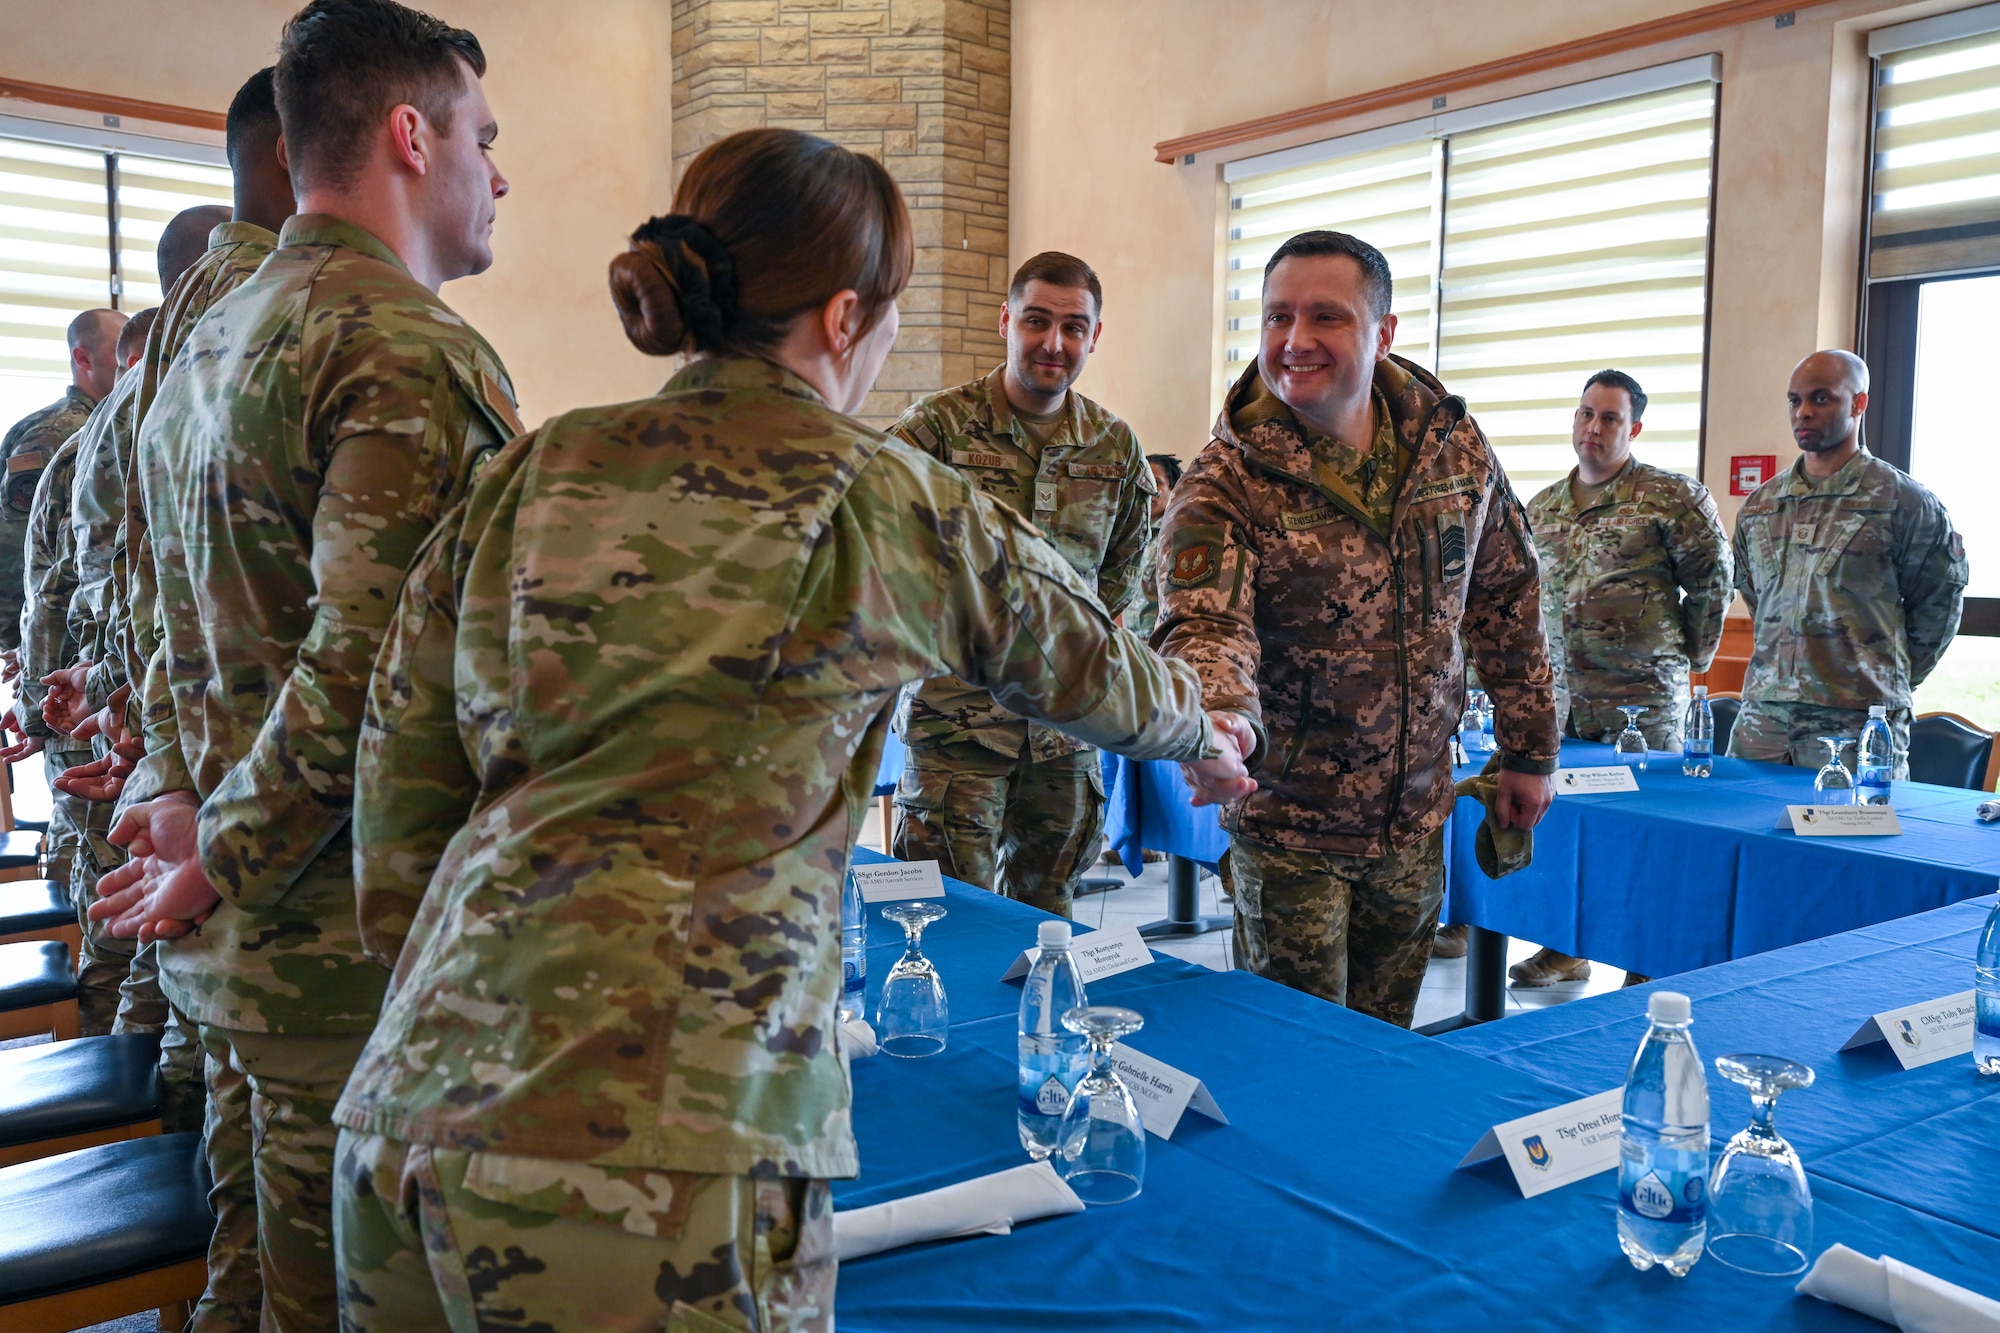 Chief Master Sgt. of the Air Force of the Armed Forces of Ukraine Kostiantyn Stanislavchuk, right, engages with Airmen during a luncheon March 22, 2023, at Spangdahlem Air Base, Germany. The purpose of Chief Stanislavchuk’s visit was to enhance joint nation interoperability and discuss issues affecting the international community of enlisted Airmen. (U.S. Air Force photo by Senior Airman Jessica Sanchez-Chen)